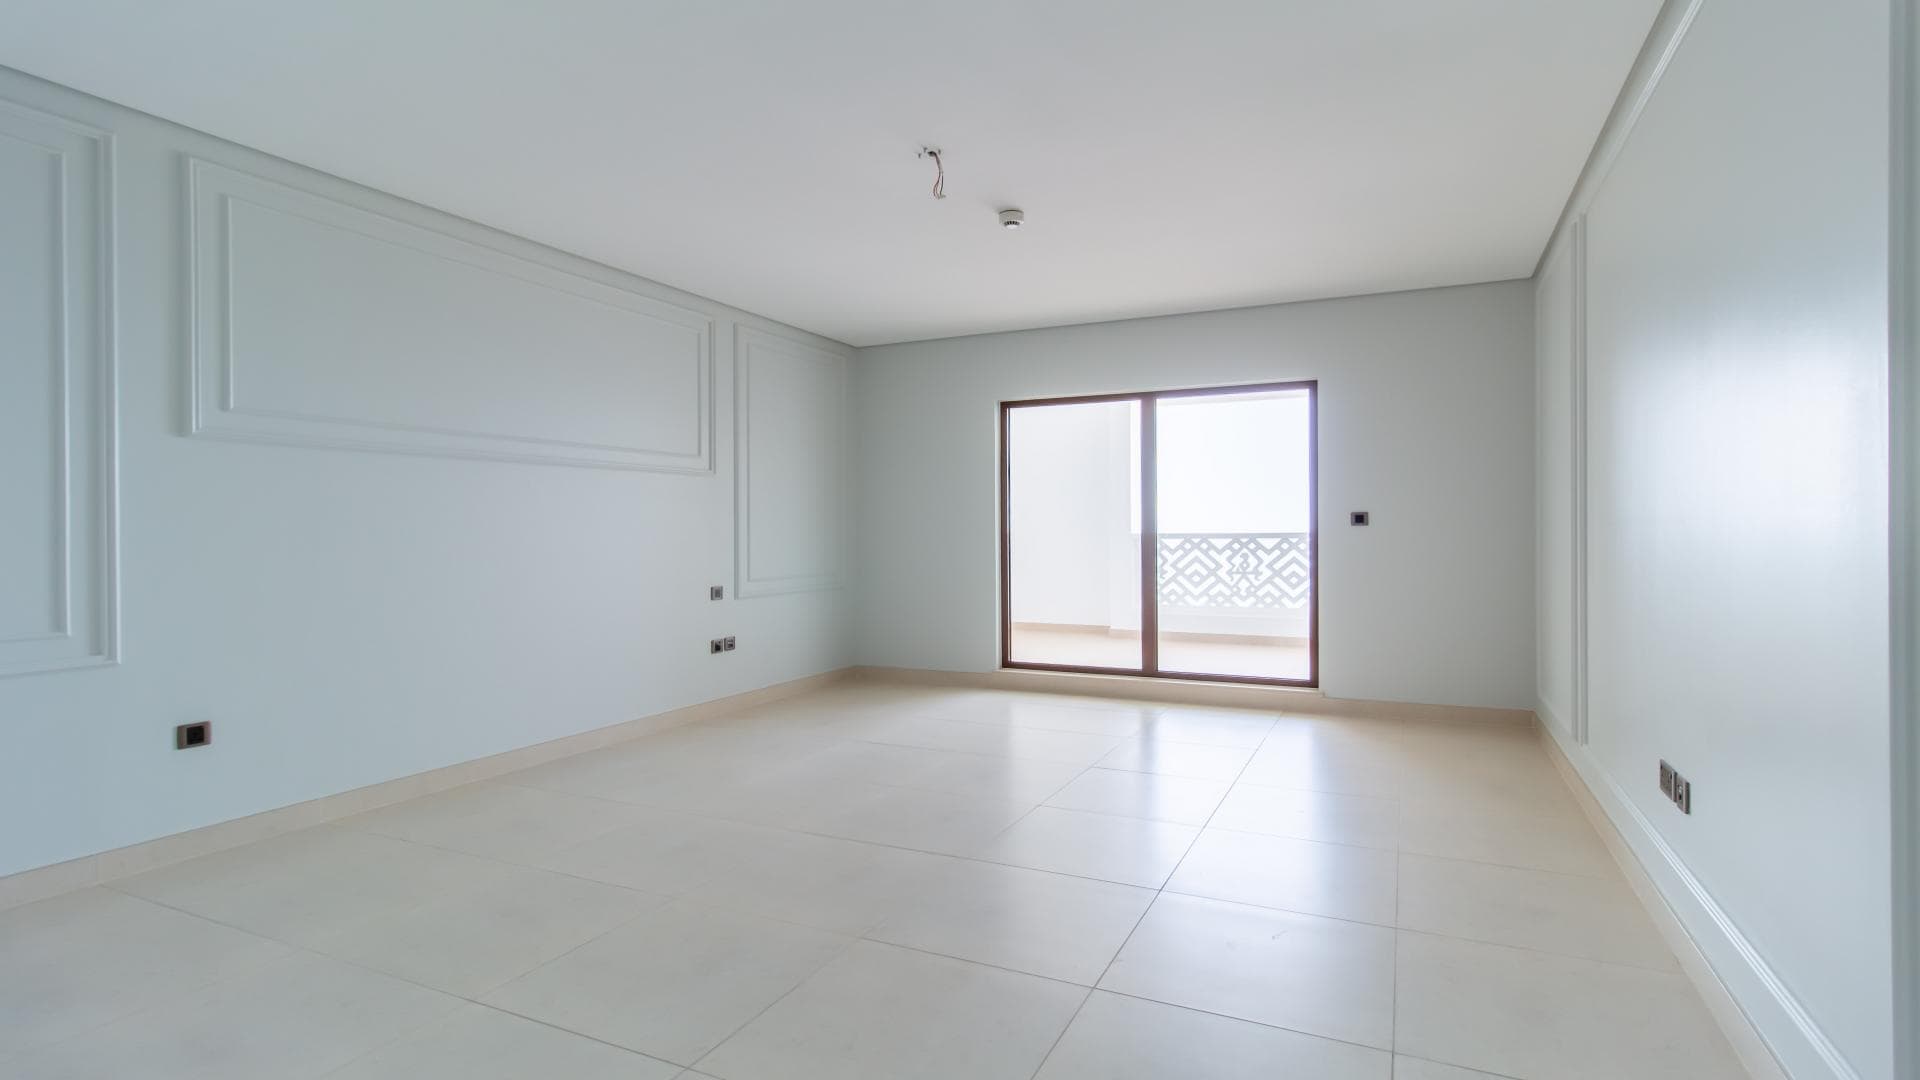 3 Bedroom Apartment For Rent Grand Residence Lp37307 A45ac3eeb794600.jpg